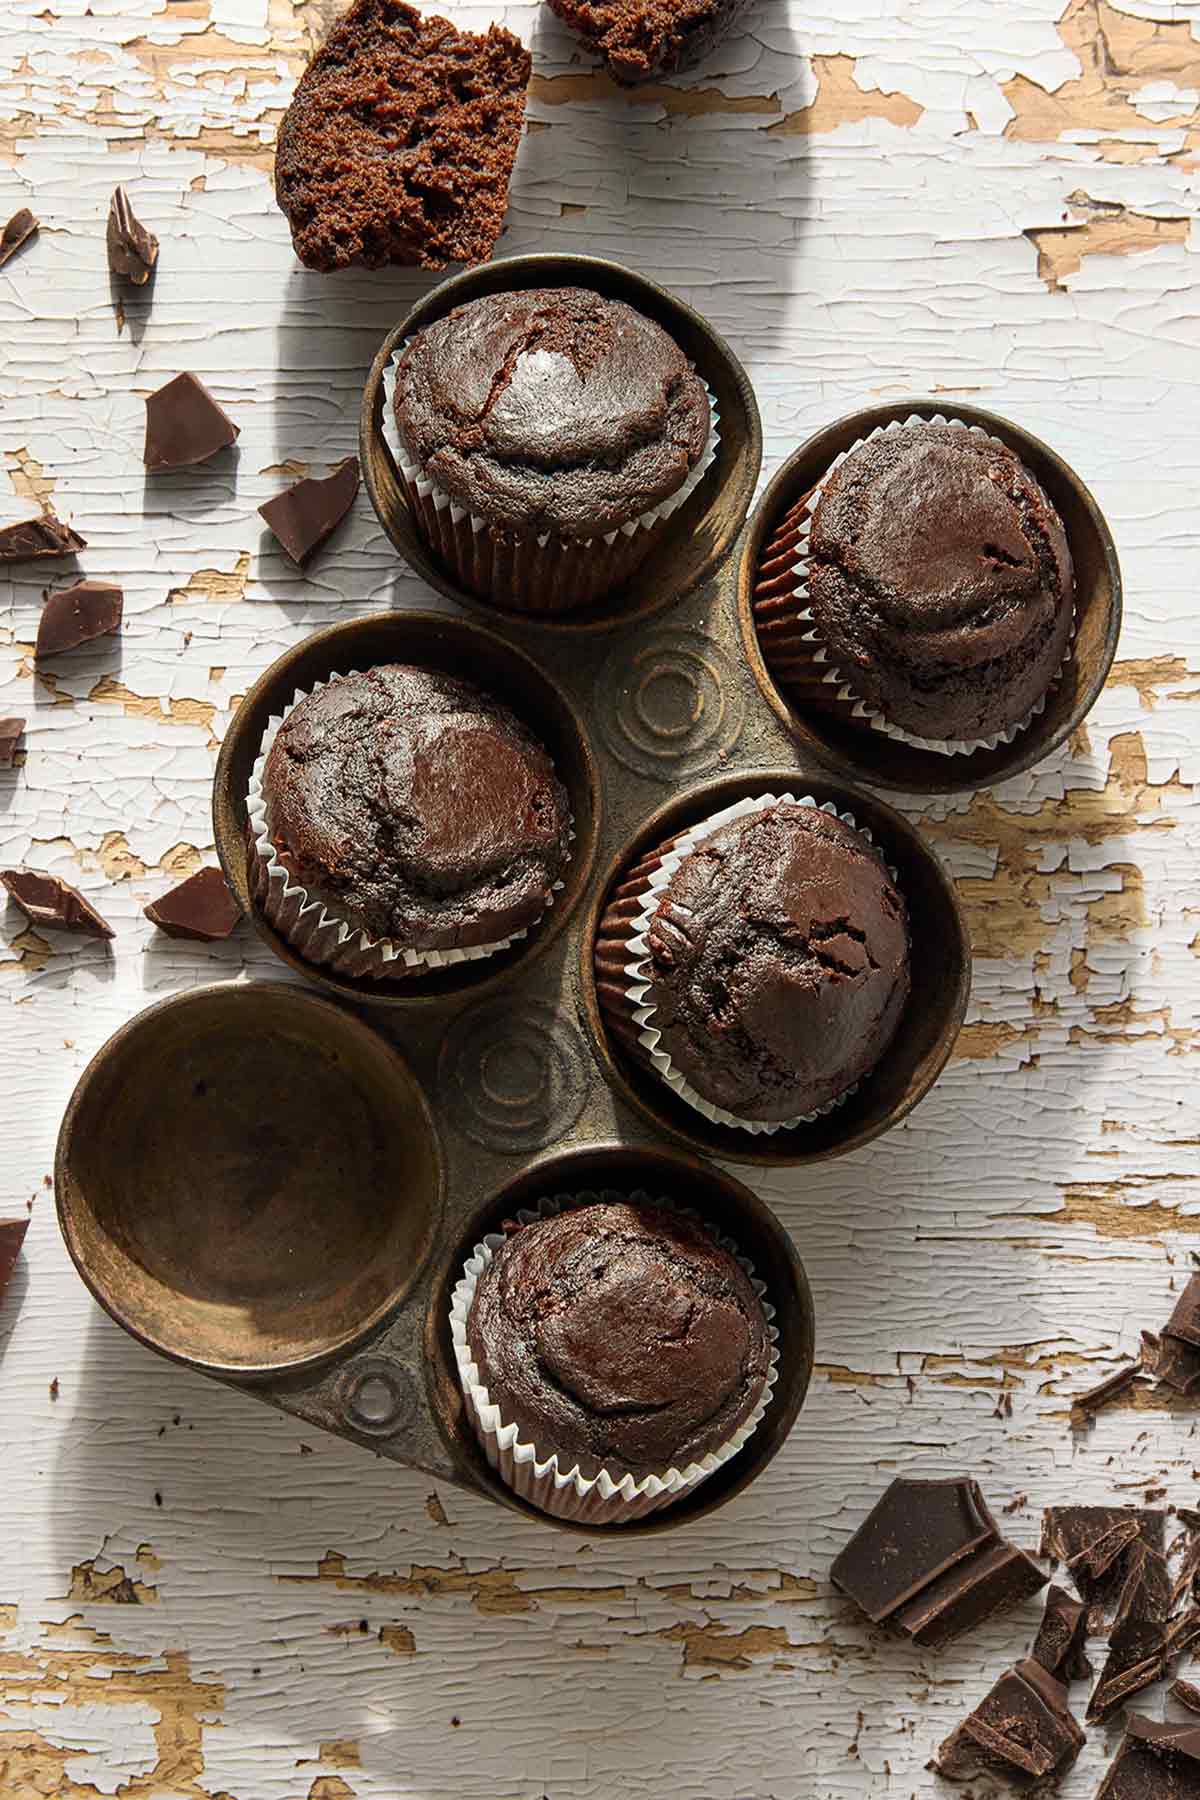 Five chocolate muffins in an antique muffin tin.